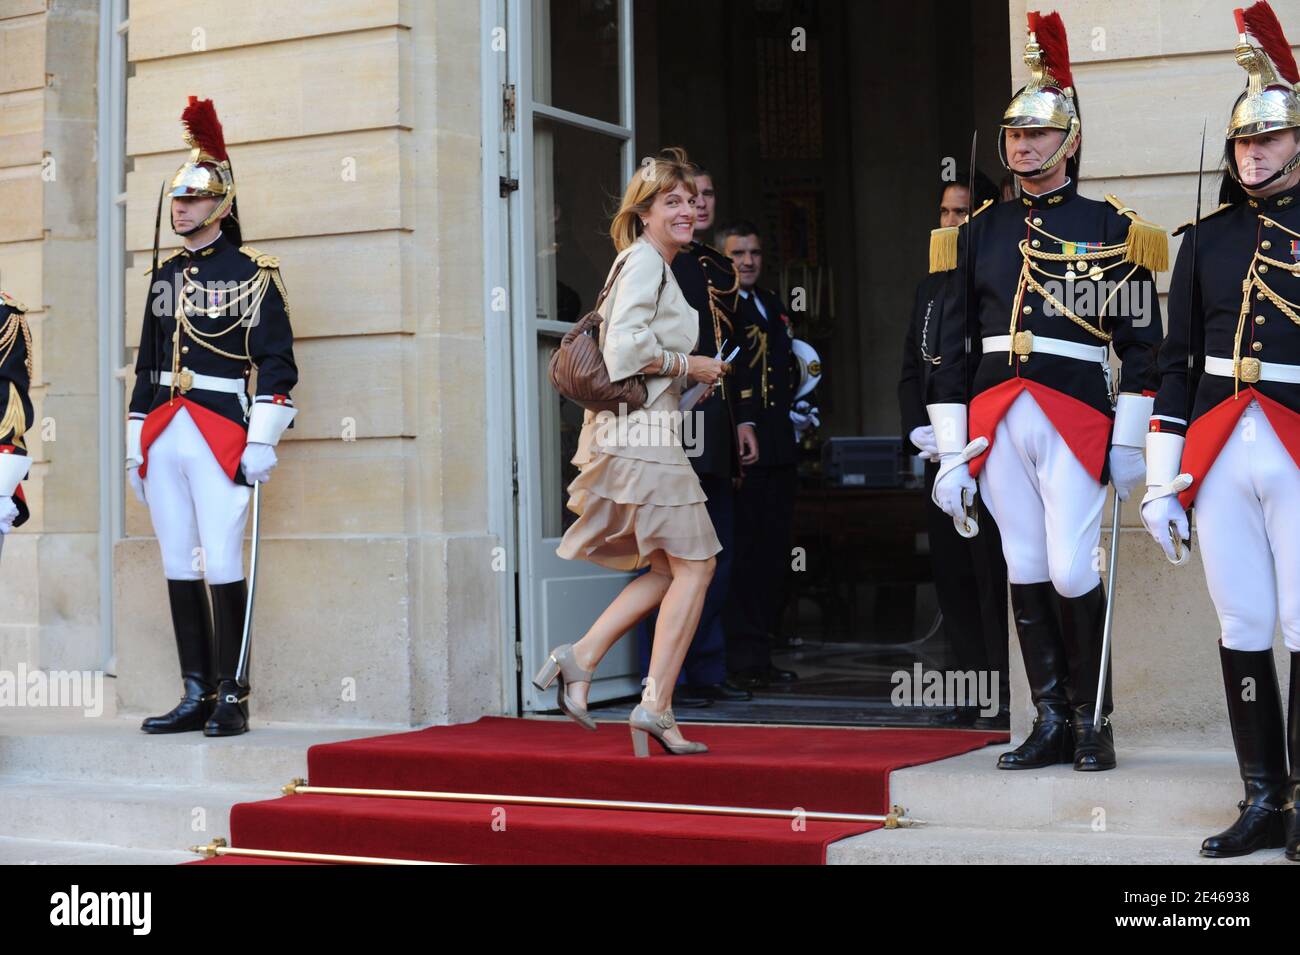 Areva's Anne Lauvergeon arrives for a dinner given by French Prime Minister Francois Fillon and his wife Penelope for Qatar's Emir Sheikh Hamad Bin Khalifa Al-Thani and his wife Sheikha Mozah Bint Nasser Al Misnad (wearing Stephane Rolland), at Matignon, in Paris, France on June 23, 2009, on the second day of the Qatari royals state visit to France. Photo by Ammar Abd Rabbo/ABACAPRESS.COM Stock Photo